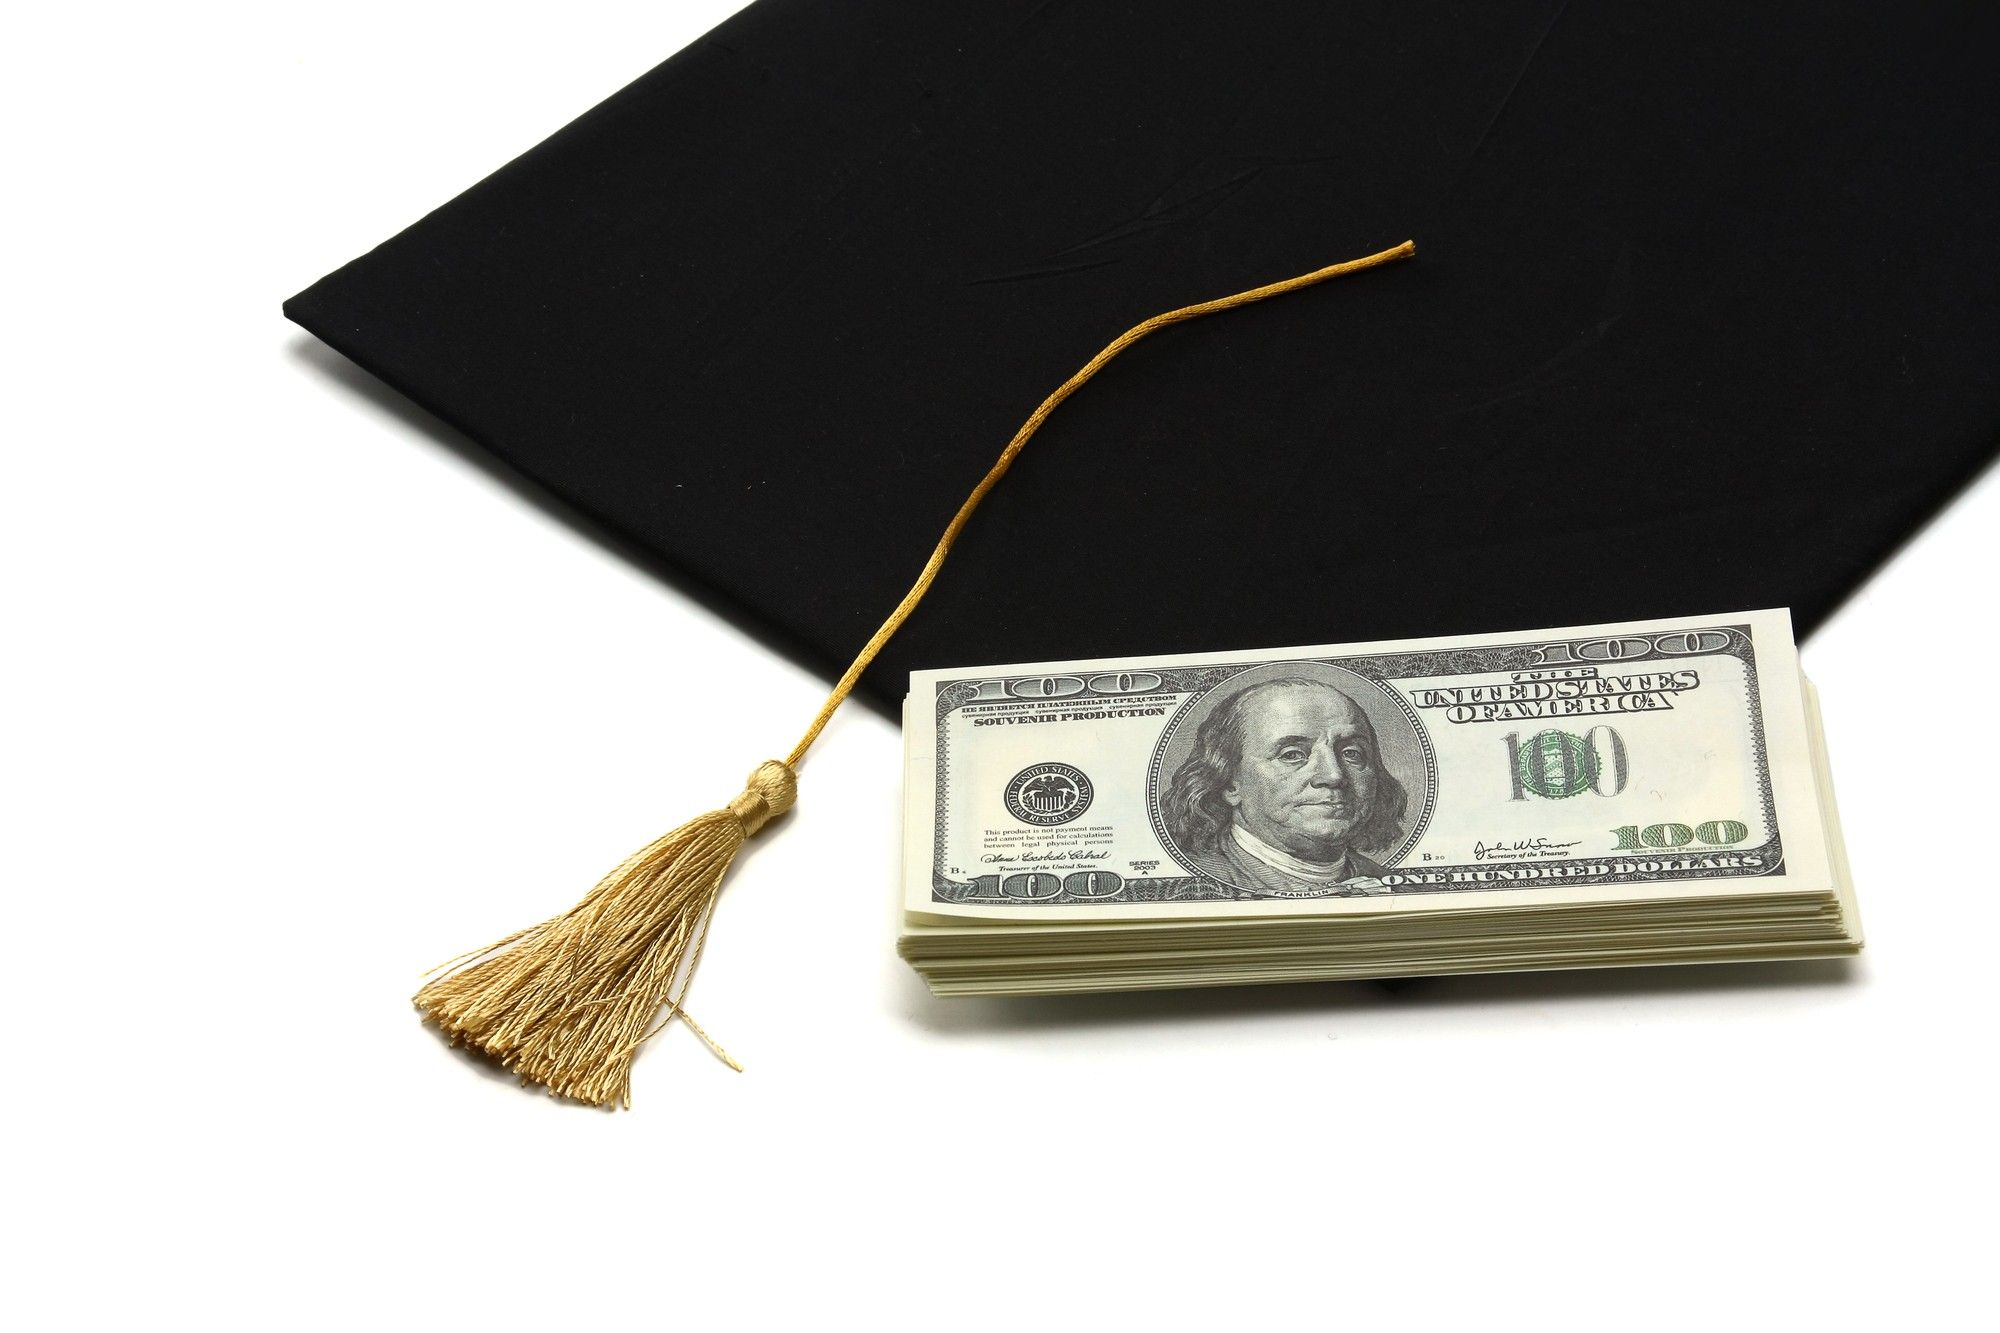 Cert. granted in Navient student loan investor class action lawsuit